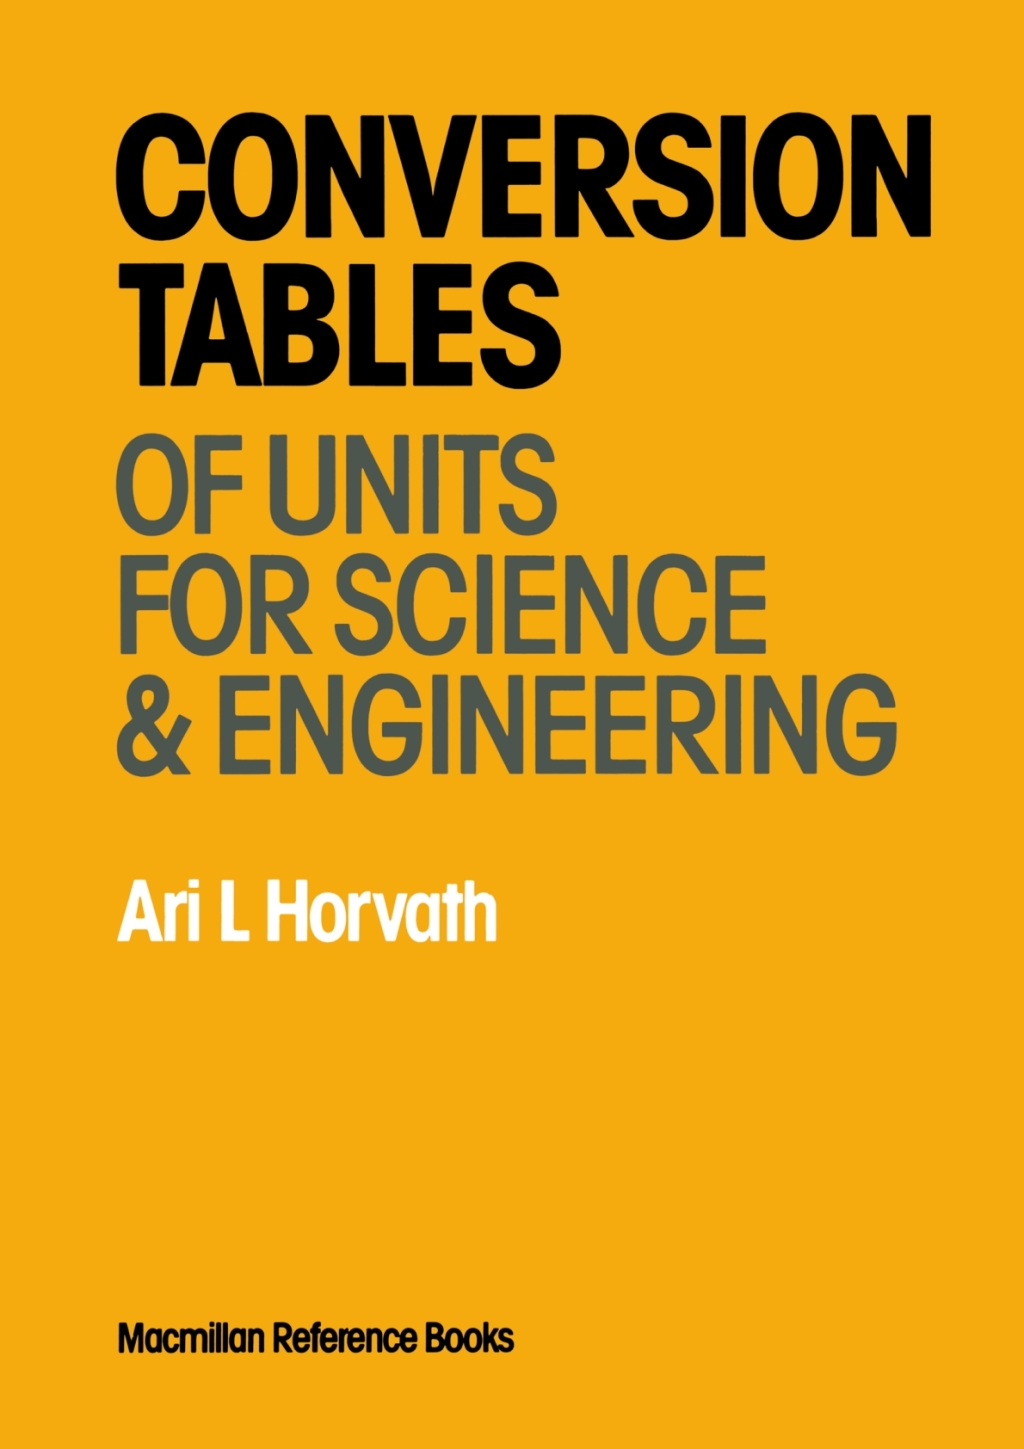 Conversion Tables of Units in Science & Engineering (eBook) - Ari L Horvath